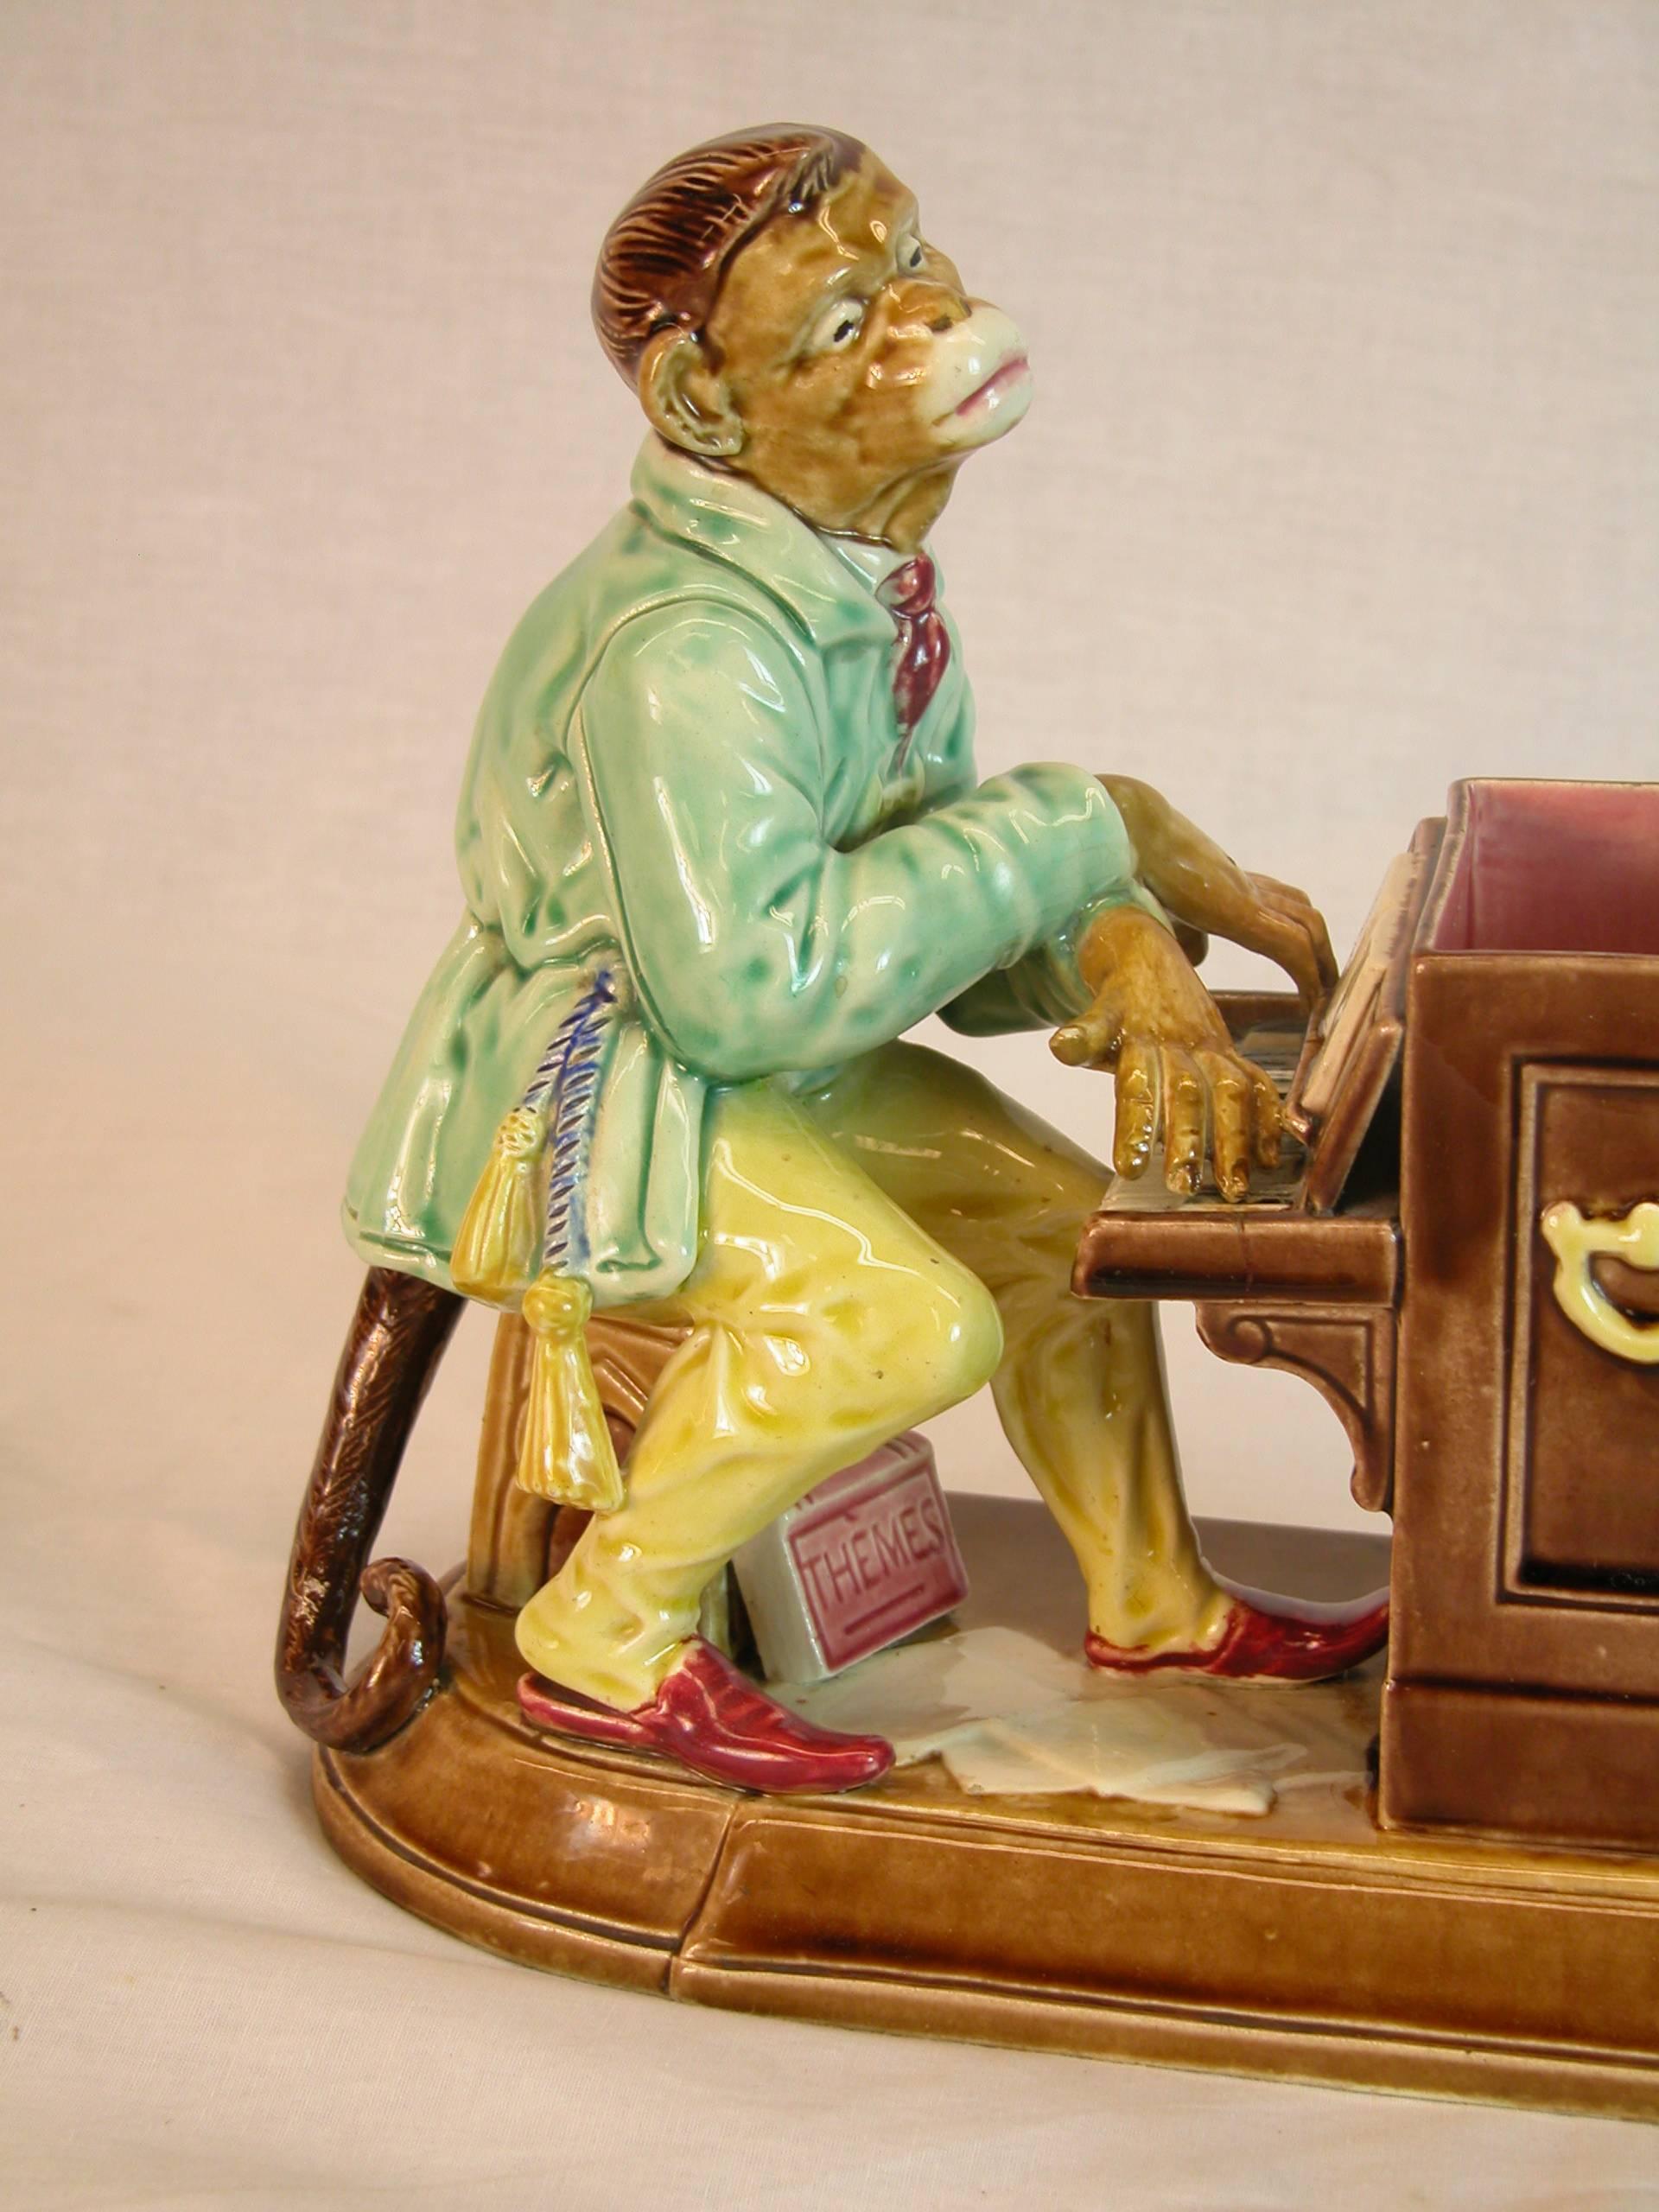 Late 19th century Sarreguemines Majolica sculpture modeled as a monkey playing the piano, brightly hand-painted in realistic colors of browns, aqua, yellow and red. Mint condition.